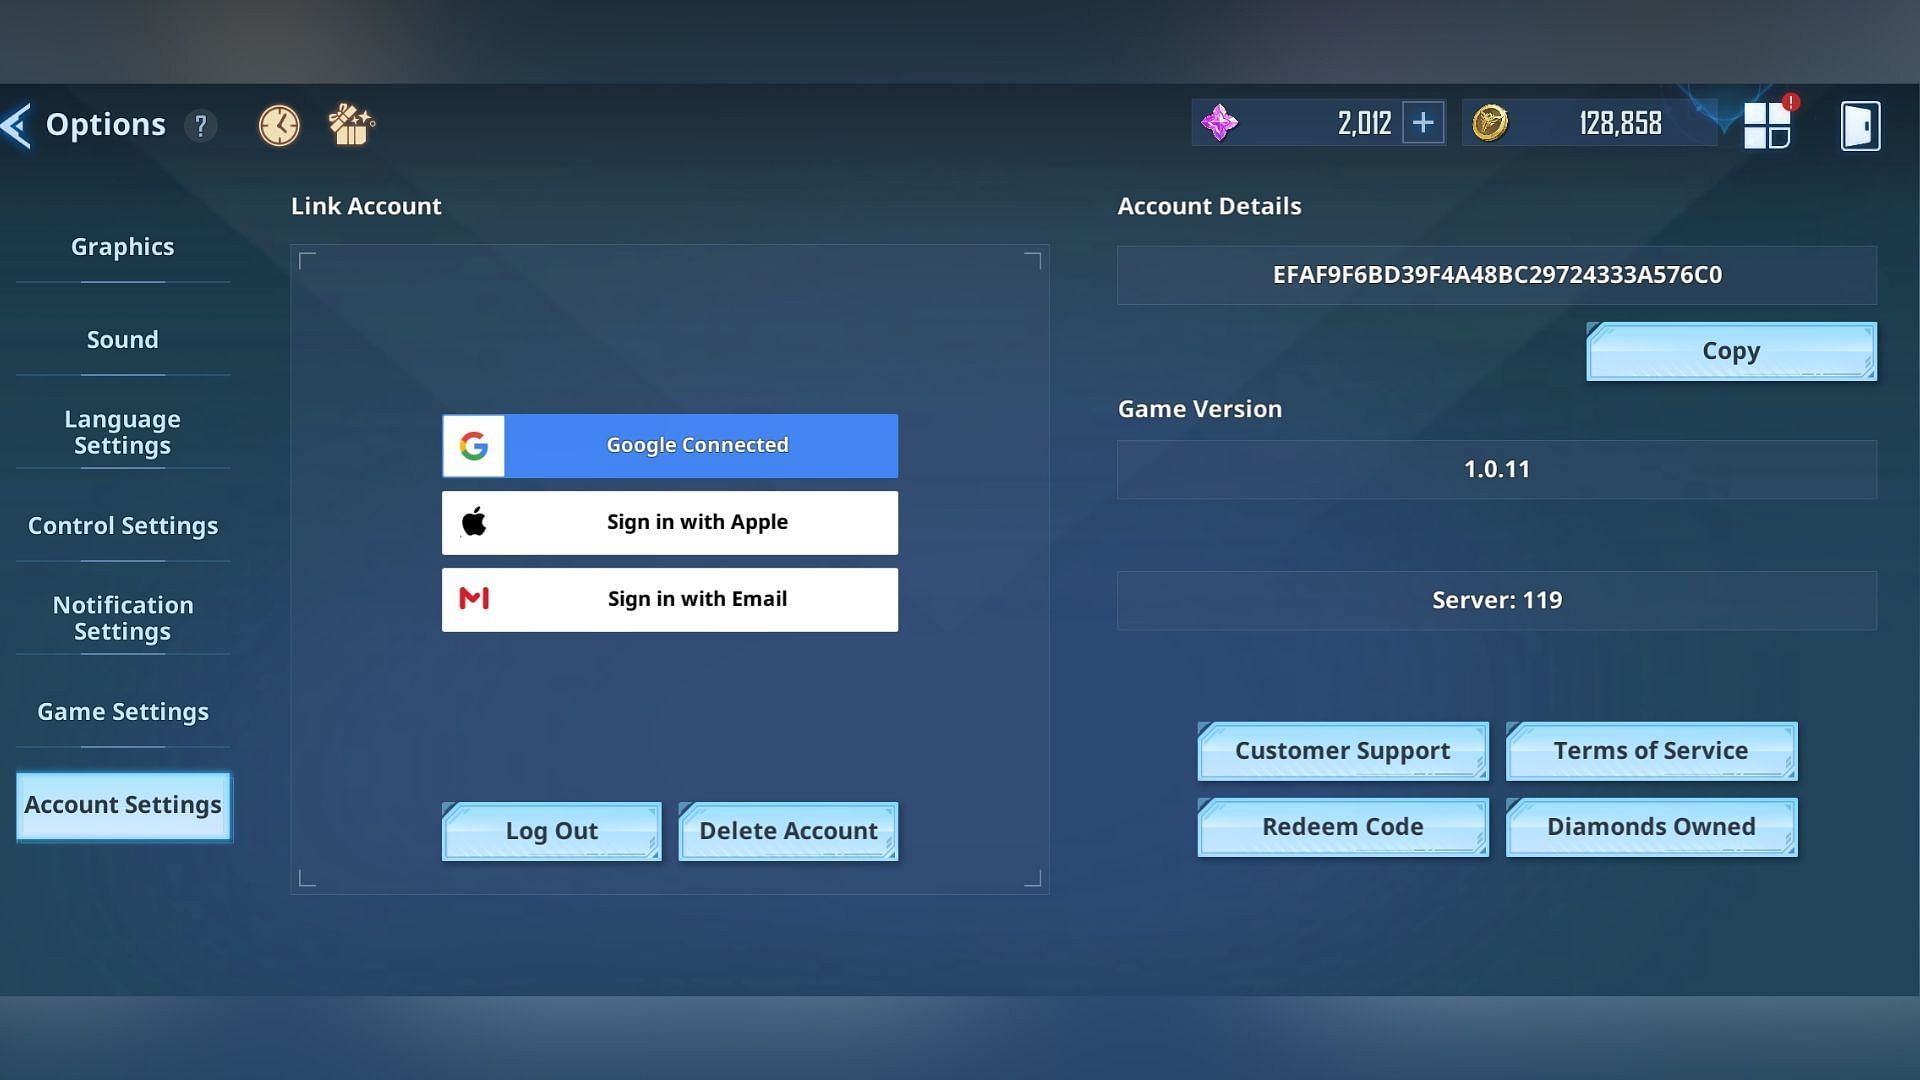 Press the copy button below the Account Details and enter it into the Enter Member Code box (Image via Netmarble)